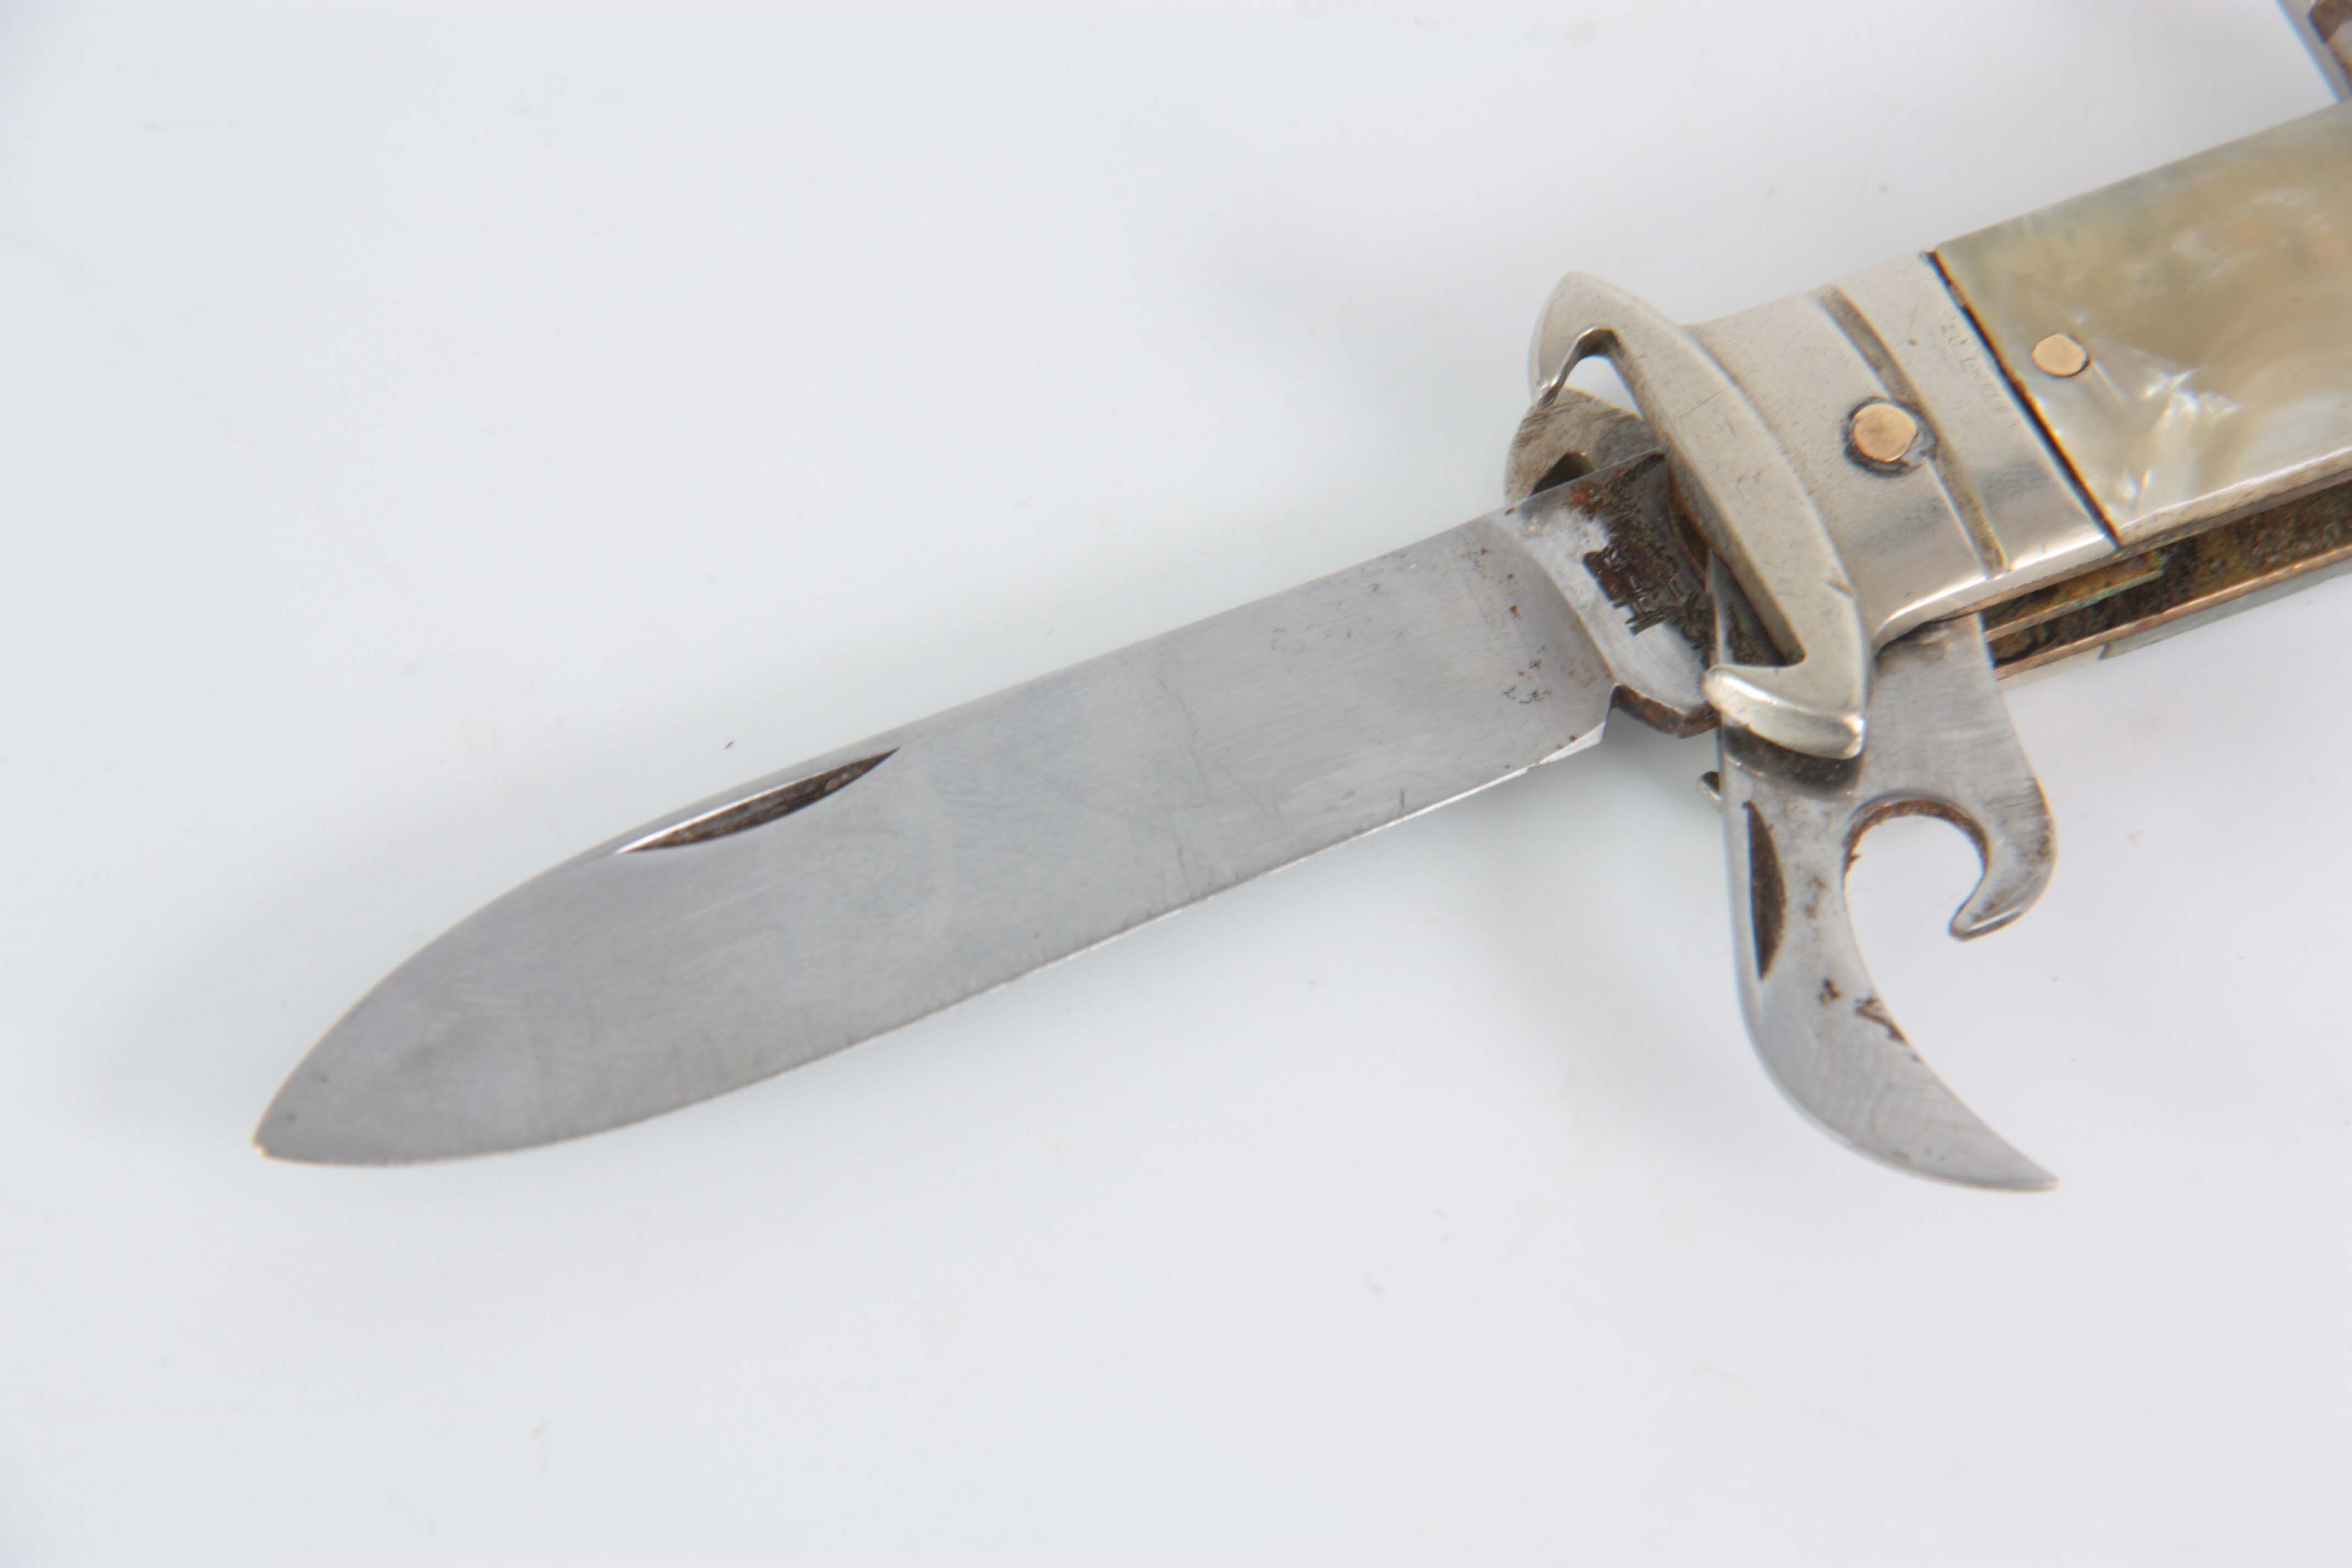 A VINTAGE SPANISH GENTLEMANS MULTI-FUNCTION HUNTING KNIFE with simulated mother of pearl handle - Image 5 of 6